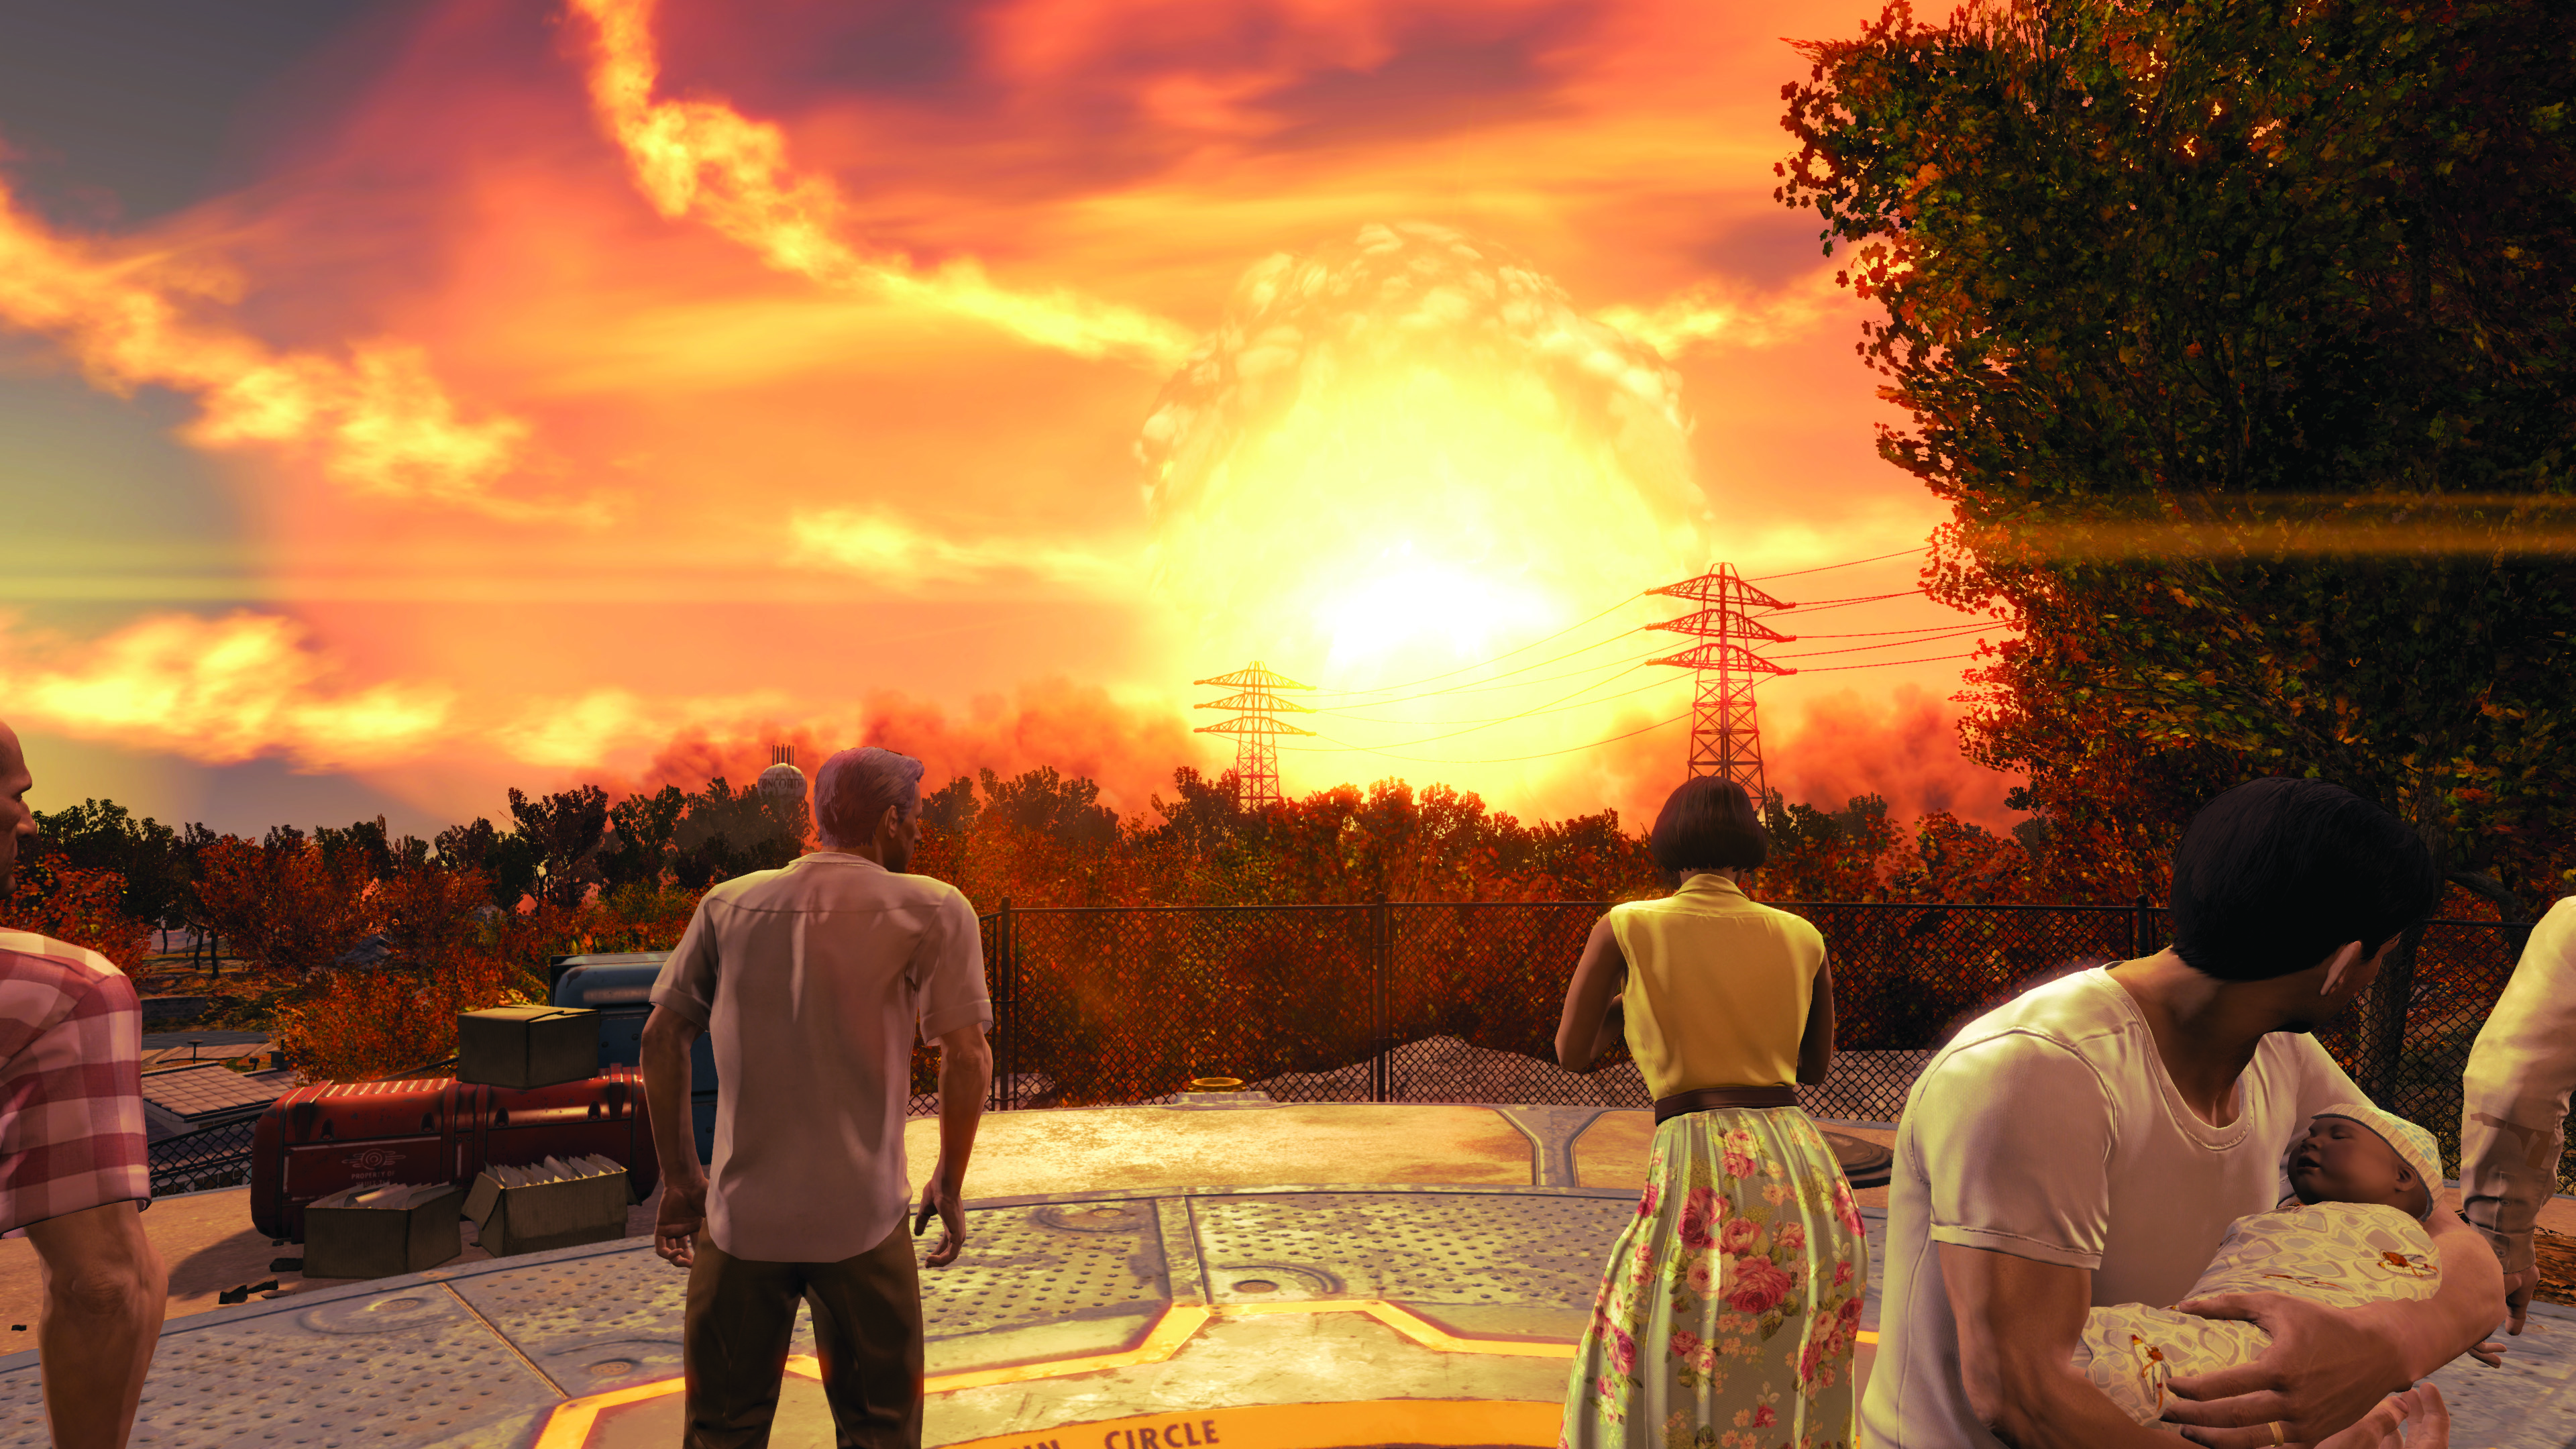 Civilians looking out an explosion in the distance